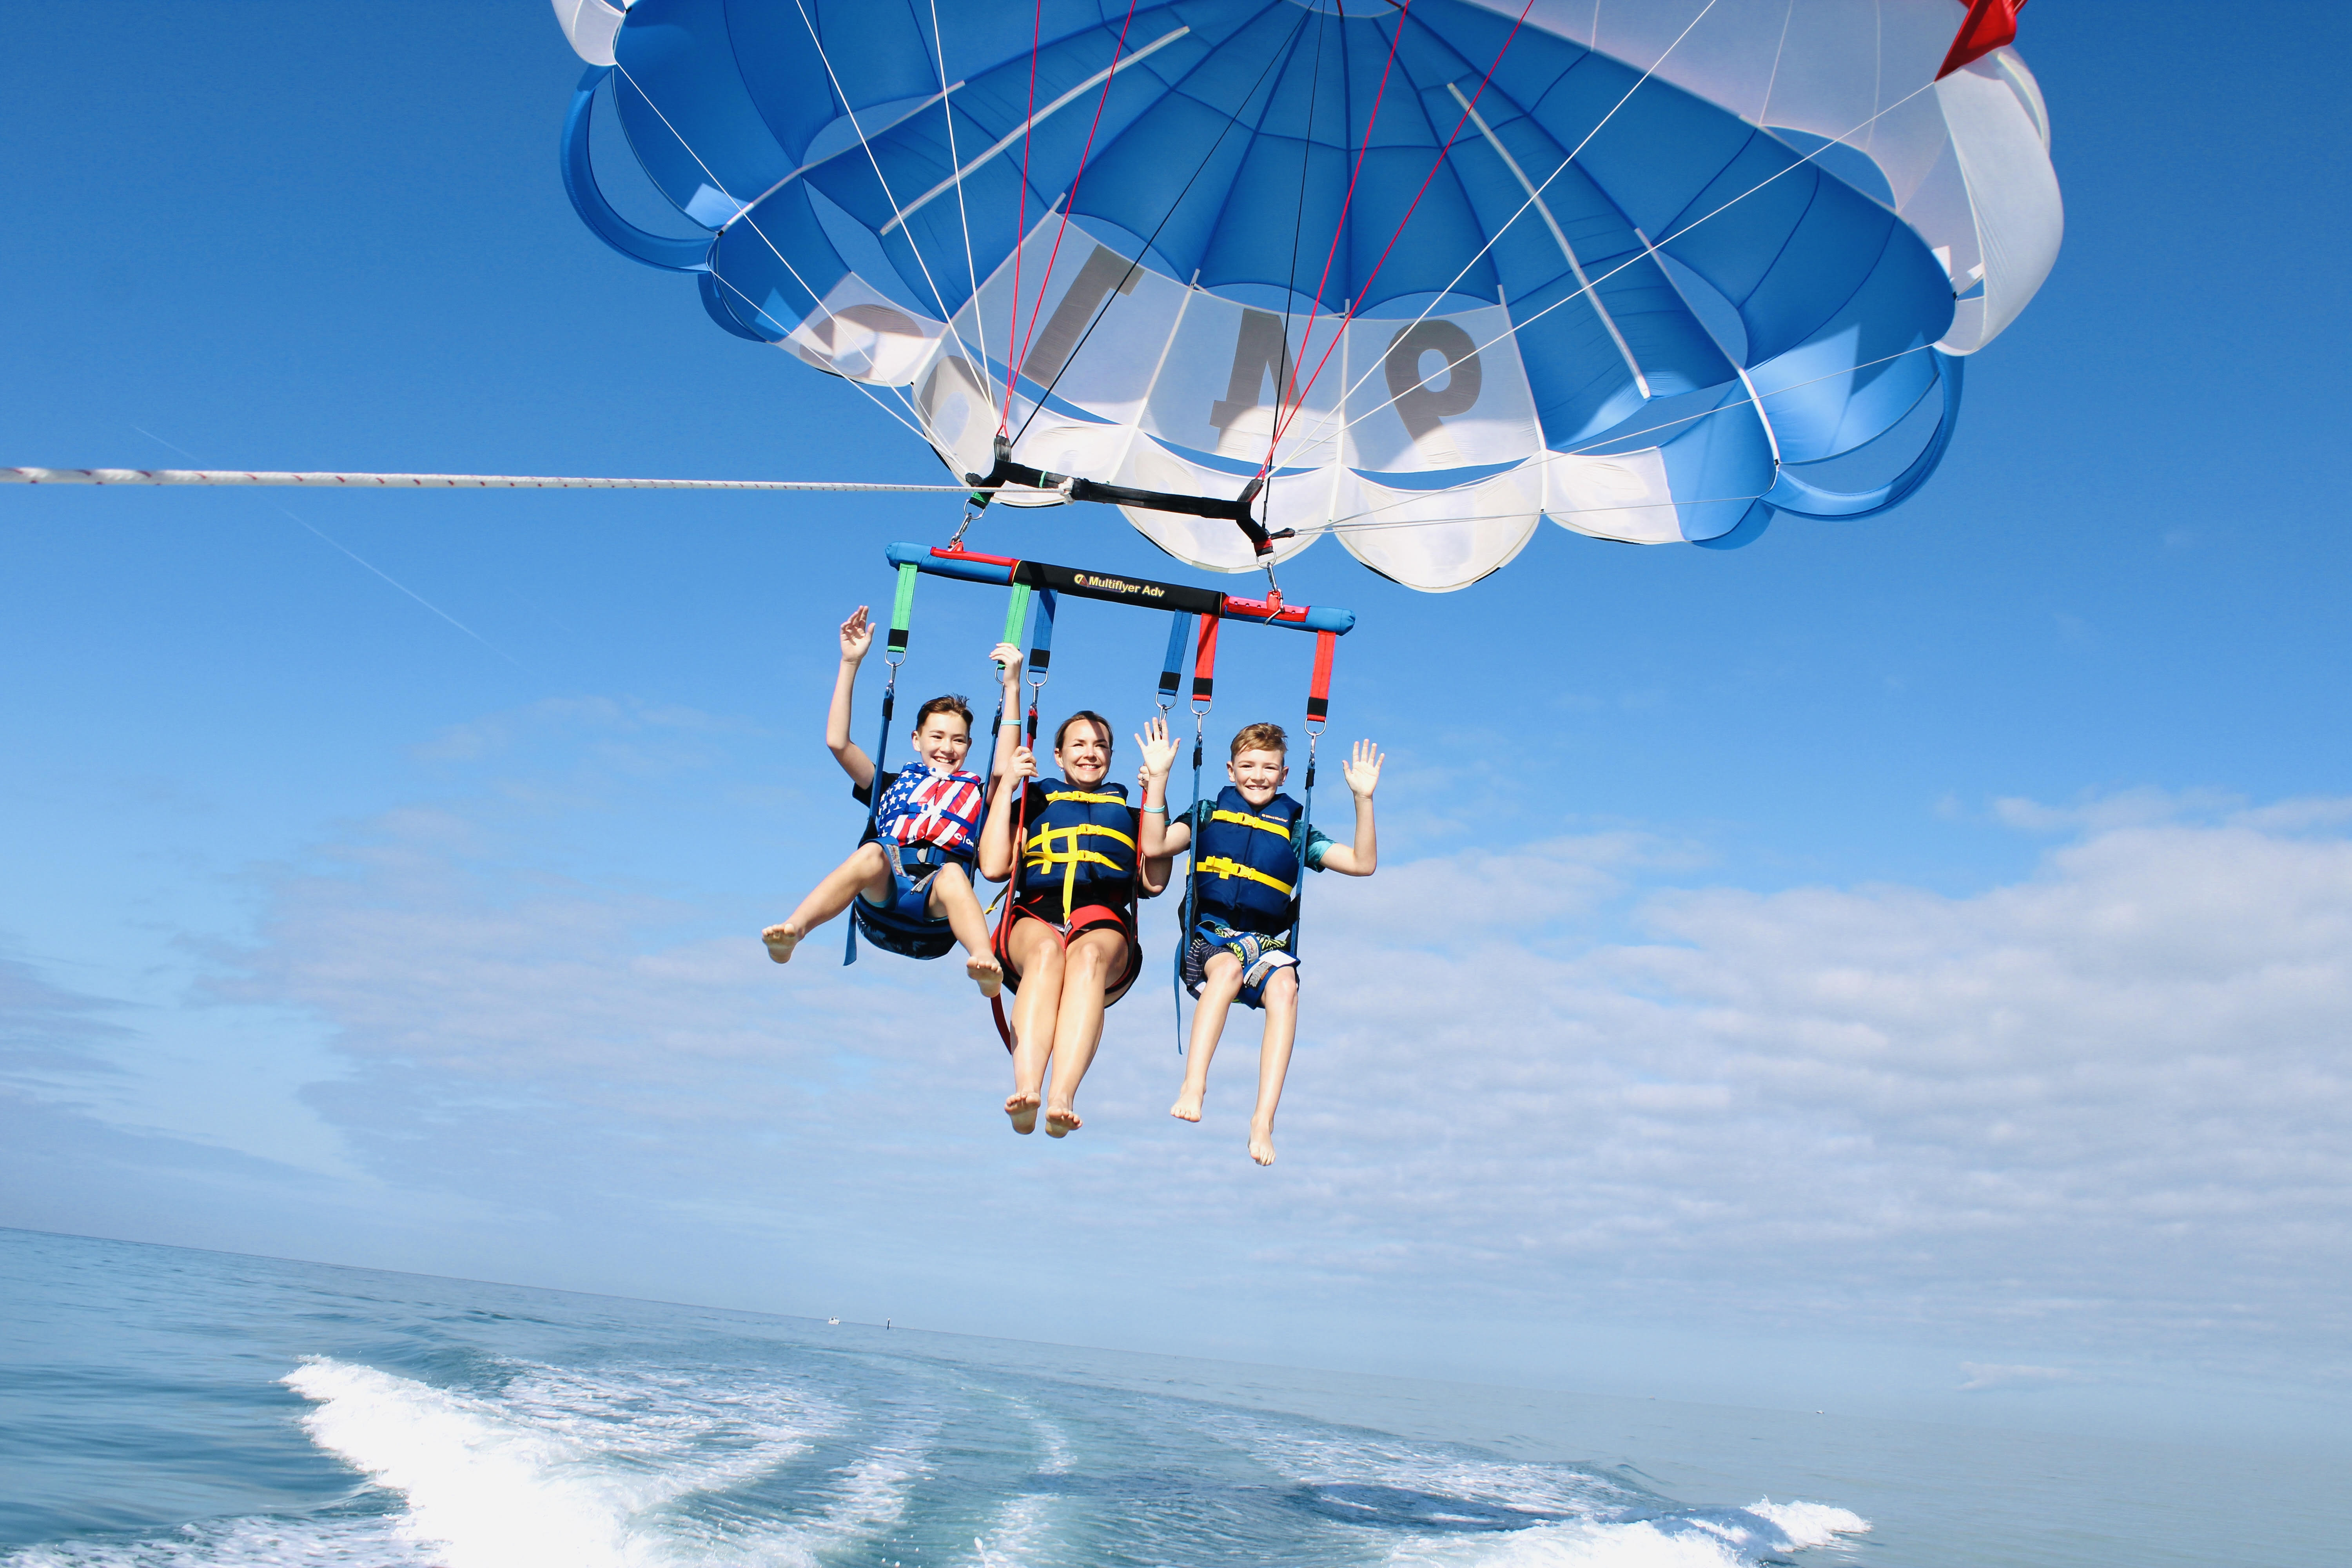 Learn all about Siesta Key parasailing (and find out, "Is Parasailing Scary?") from Top U.S. Family Travel Blog, Travel With A Plan.